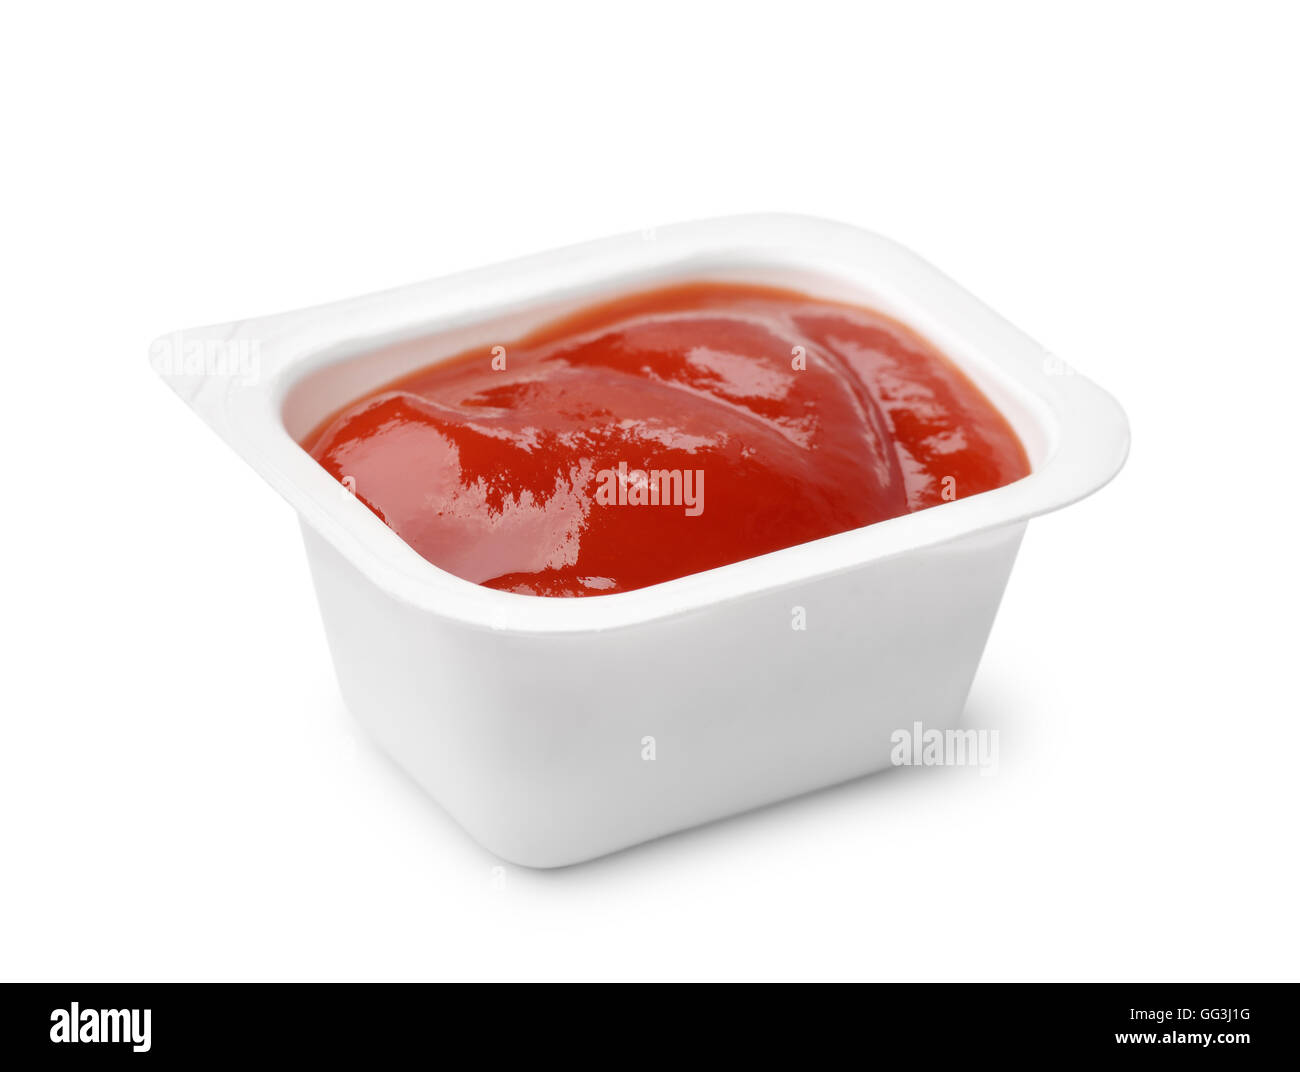 Fast food ketchup ouvert paquet dip isolated on white Banque D'Images